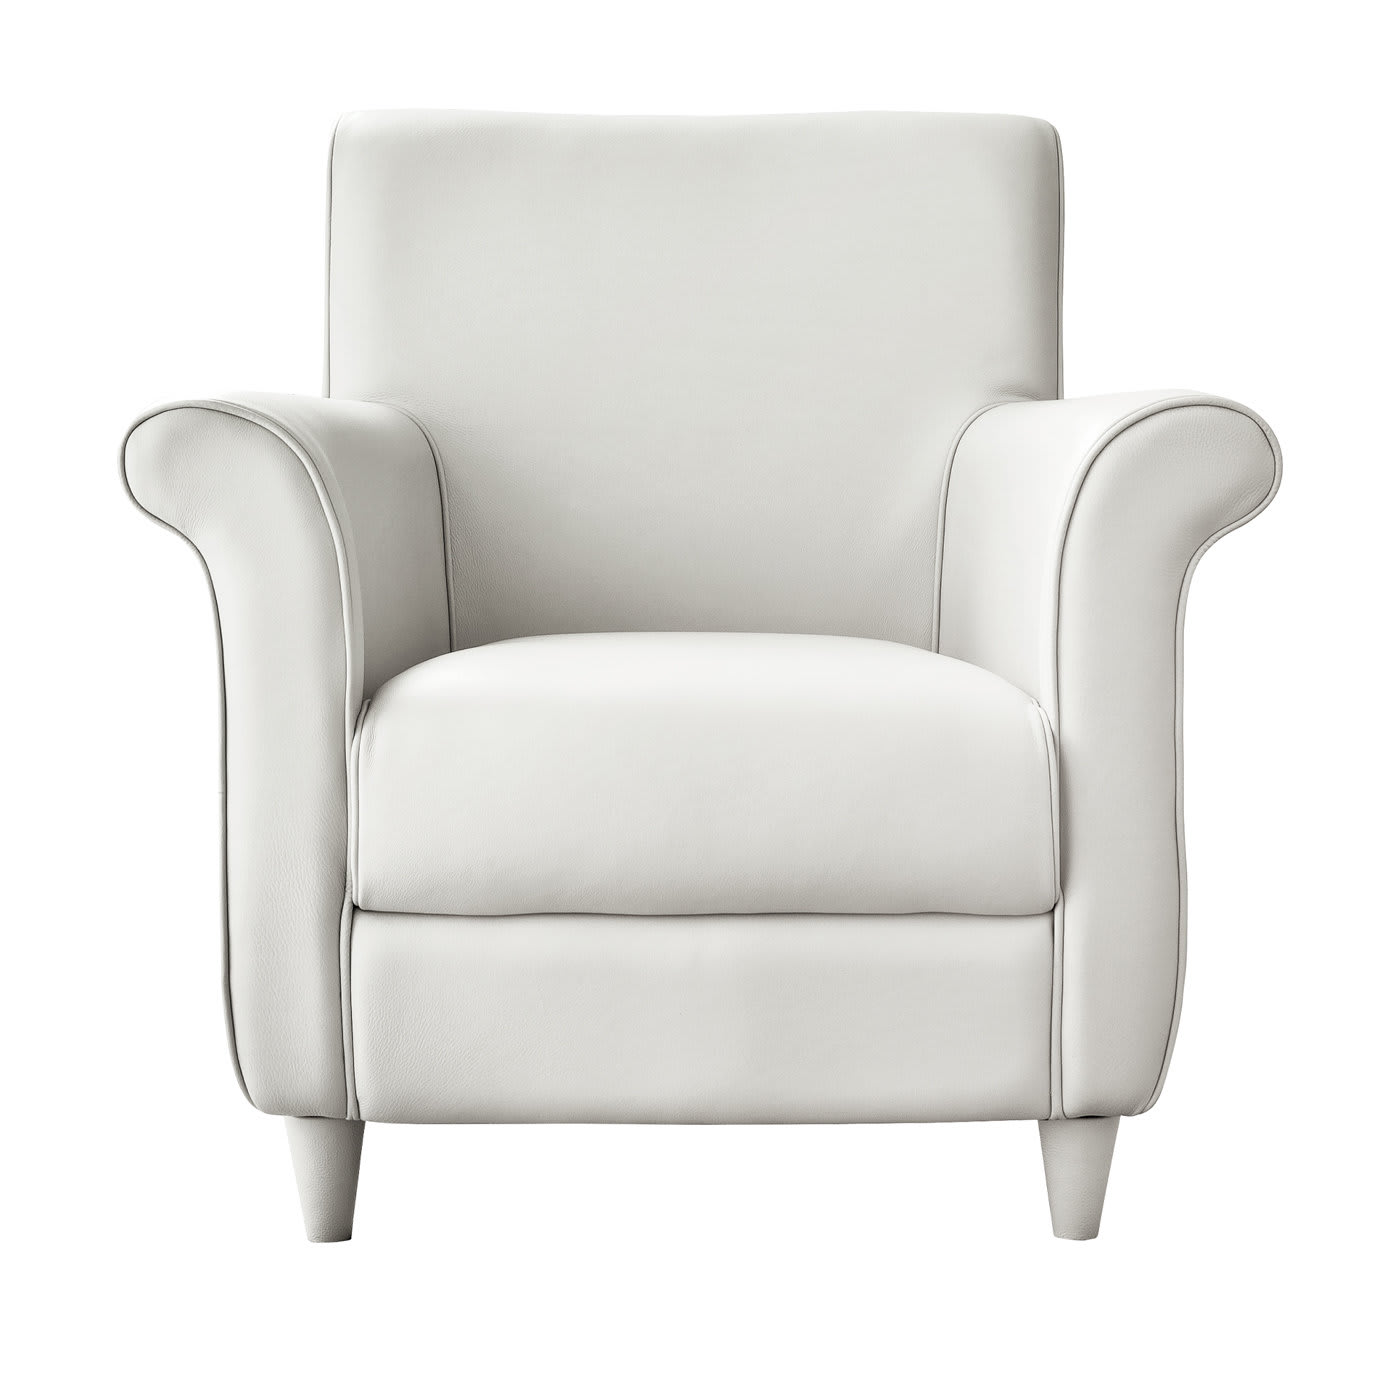 Classic White Armchair - Dall'Agnese